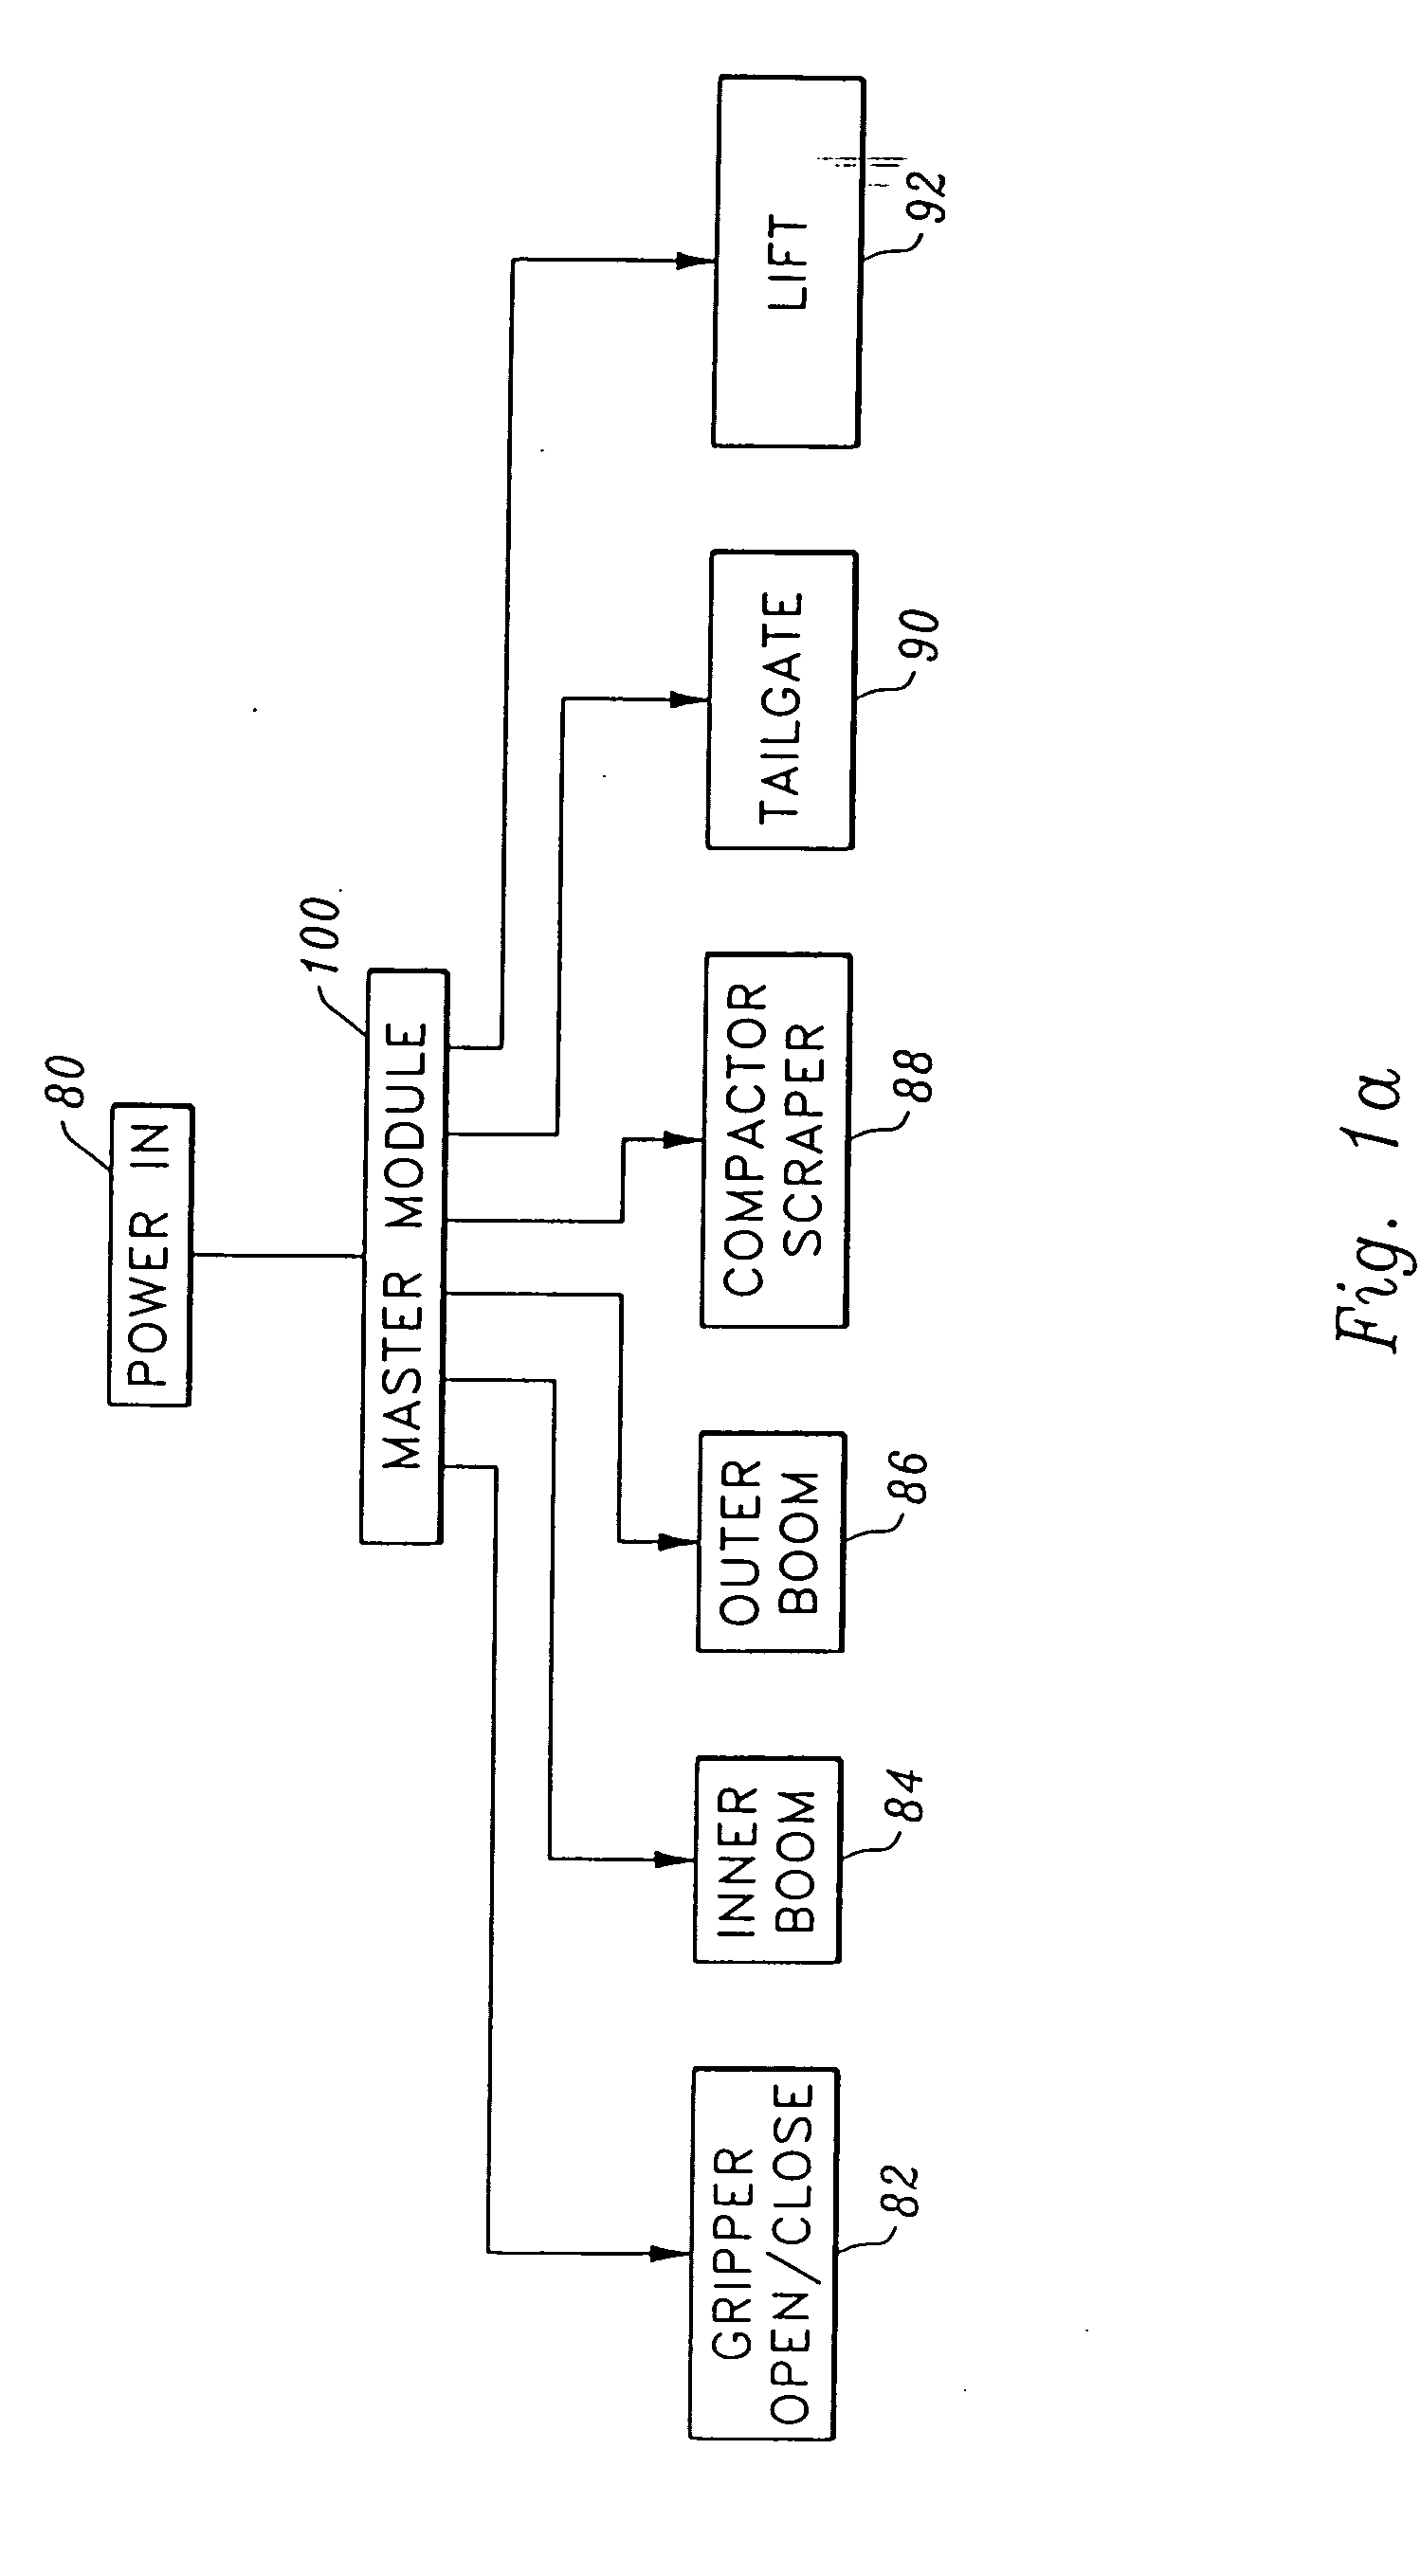 Method and apparatus for control of hydraulic systems